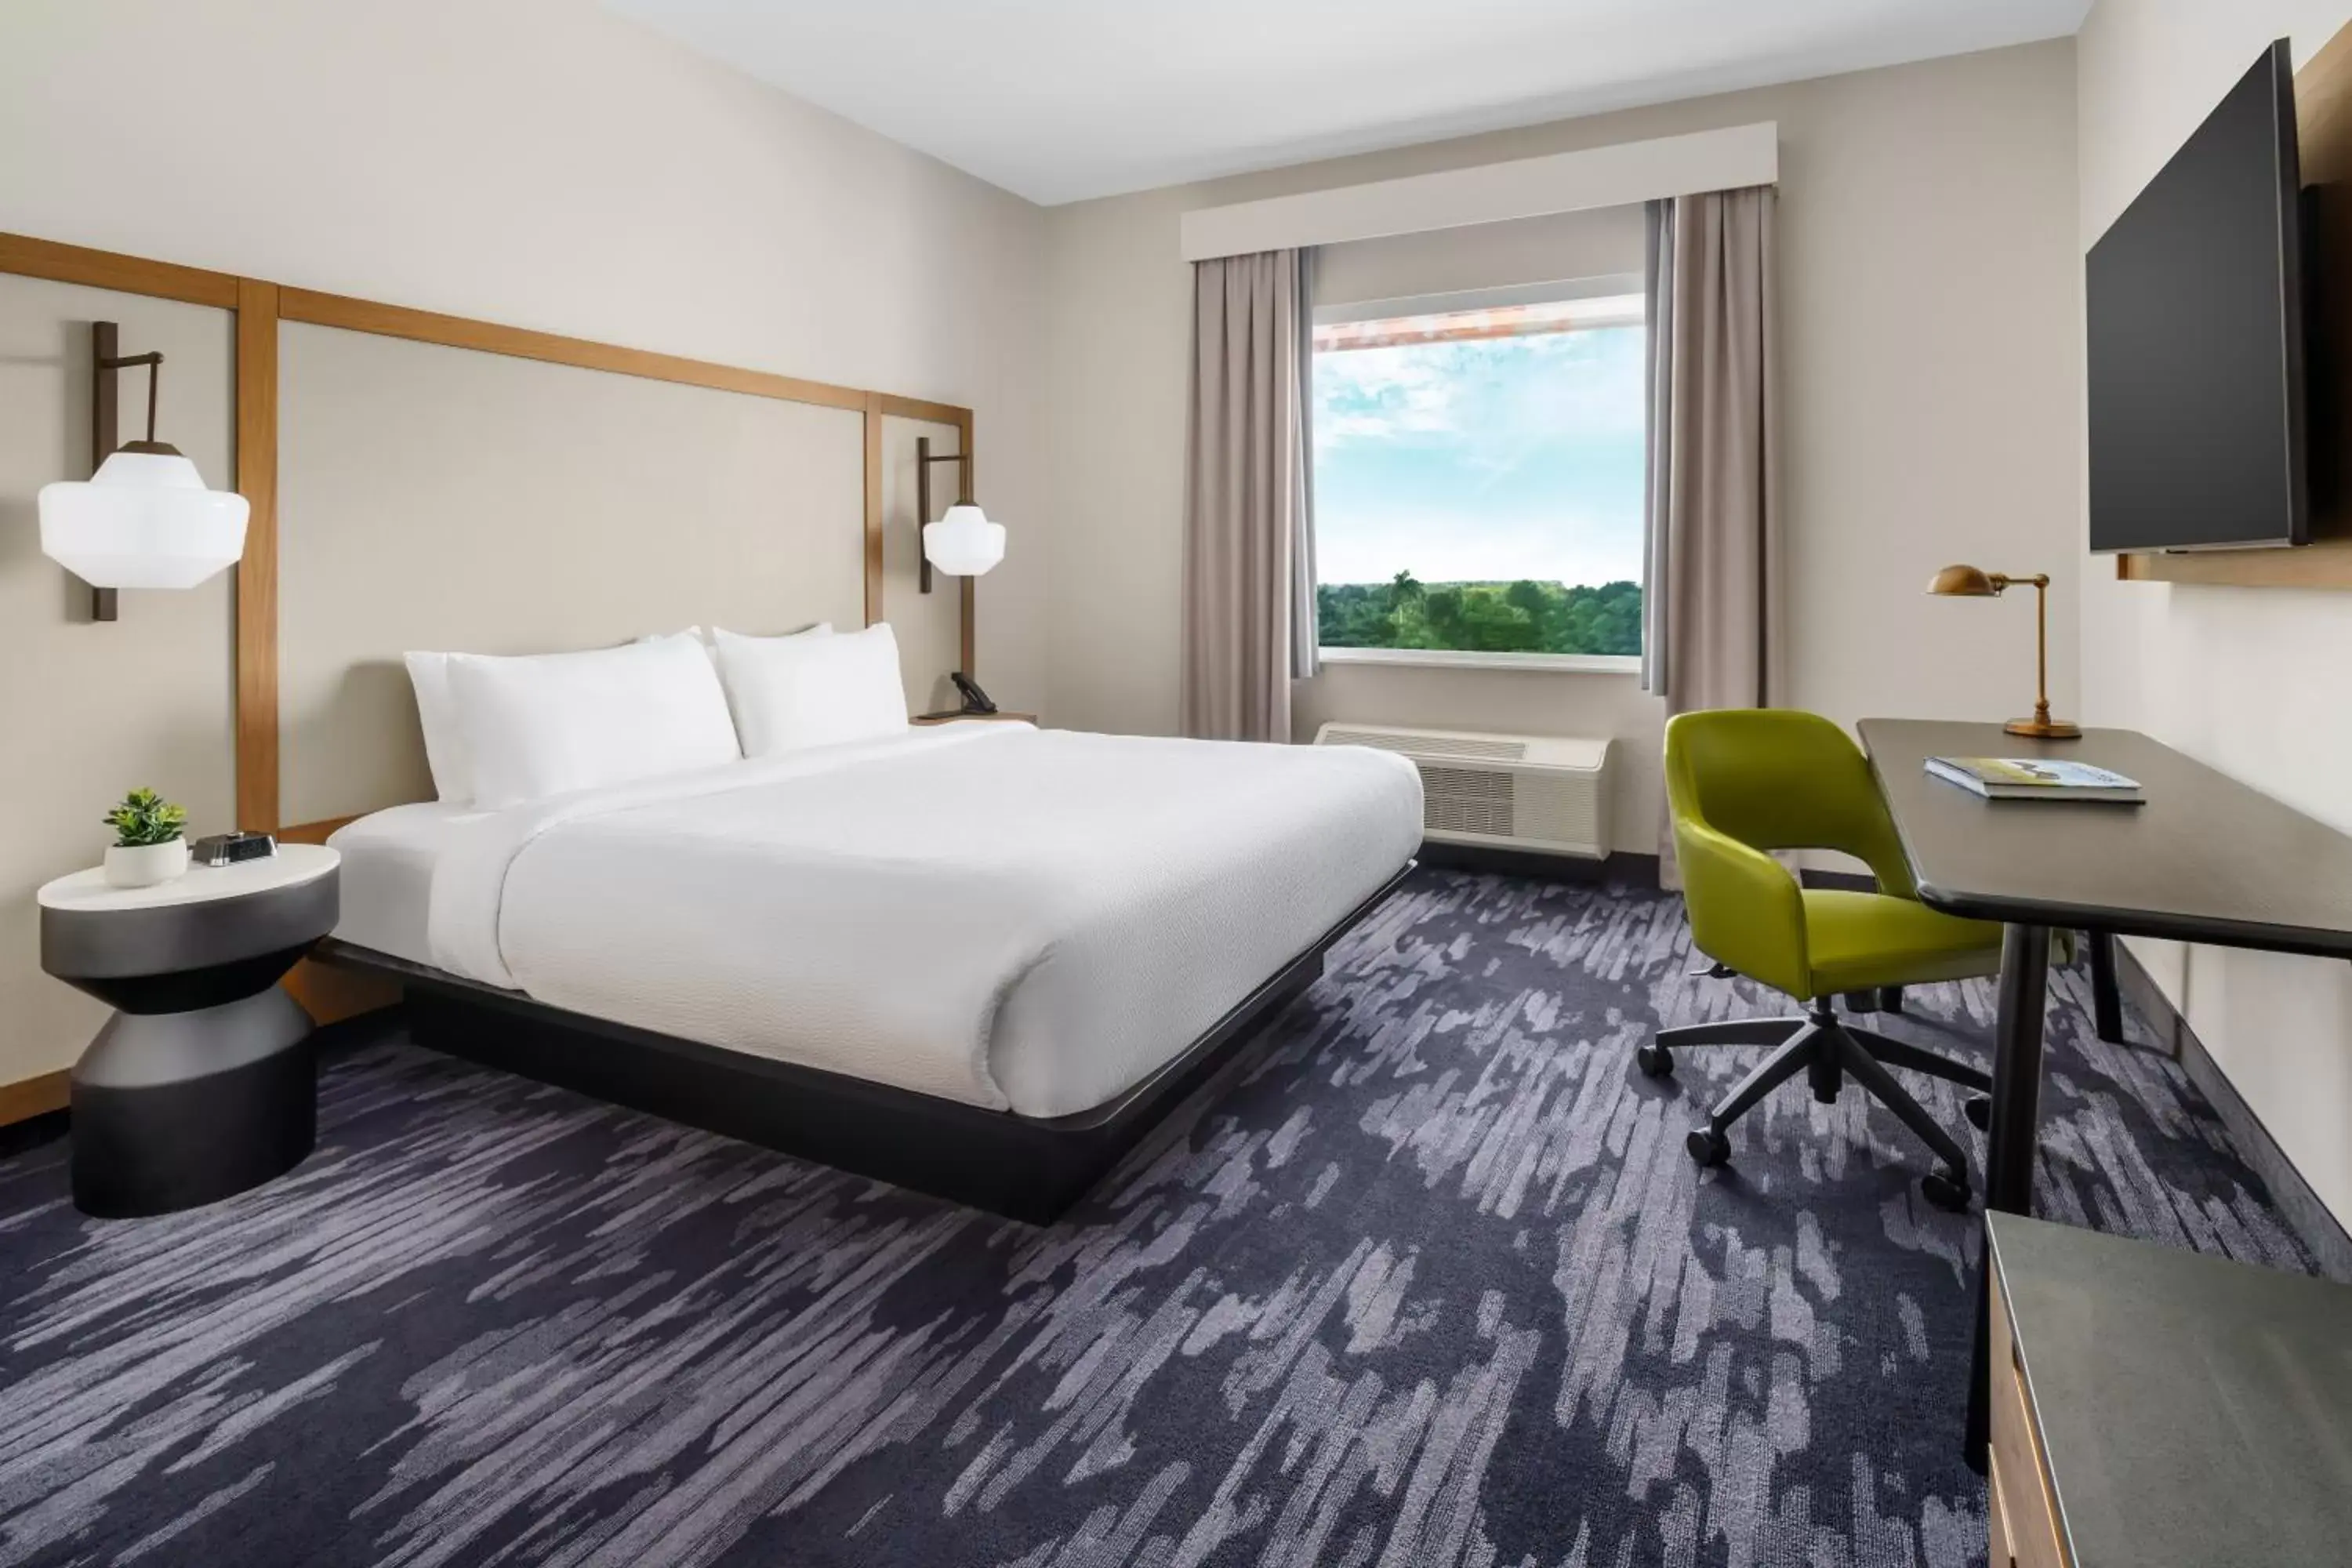 Guests, Bed in Fairfield Inn & Suites Homestead Florida City